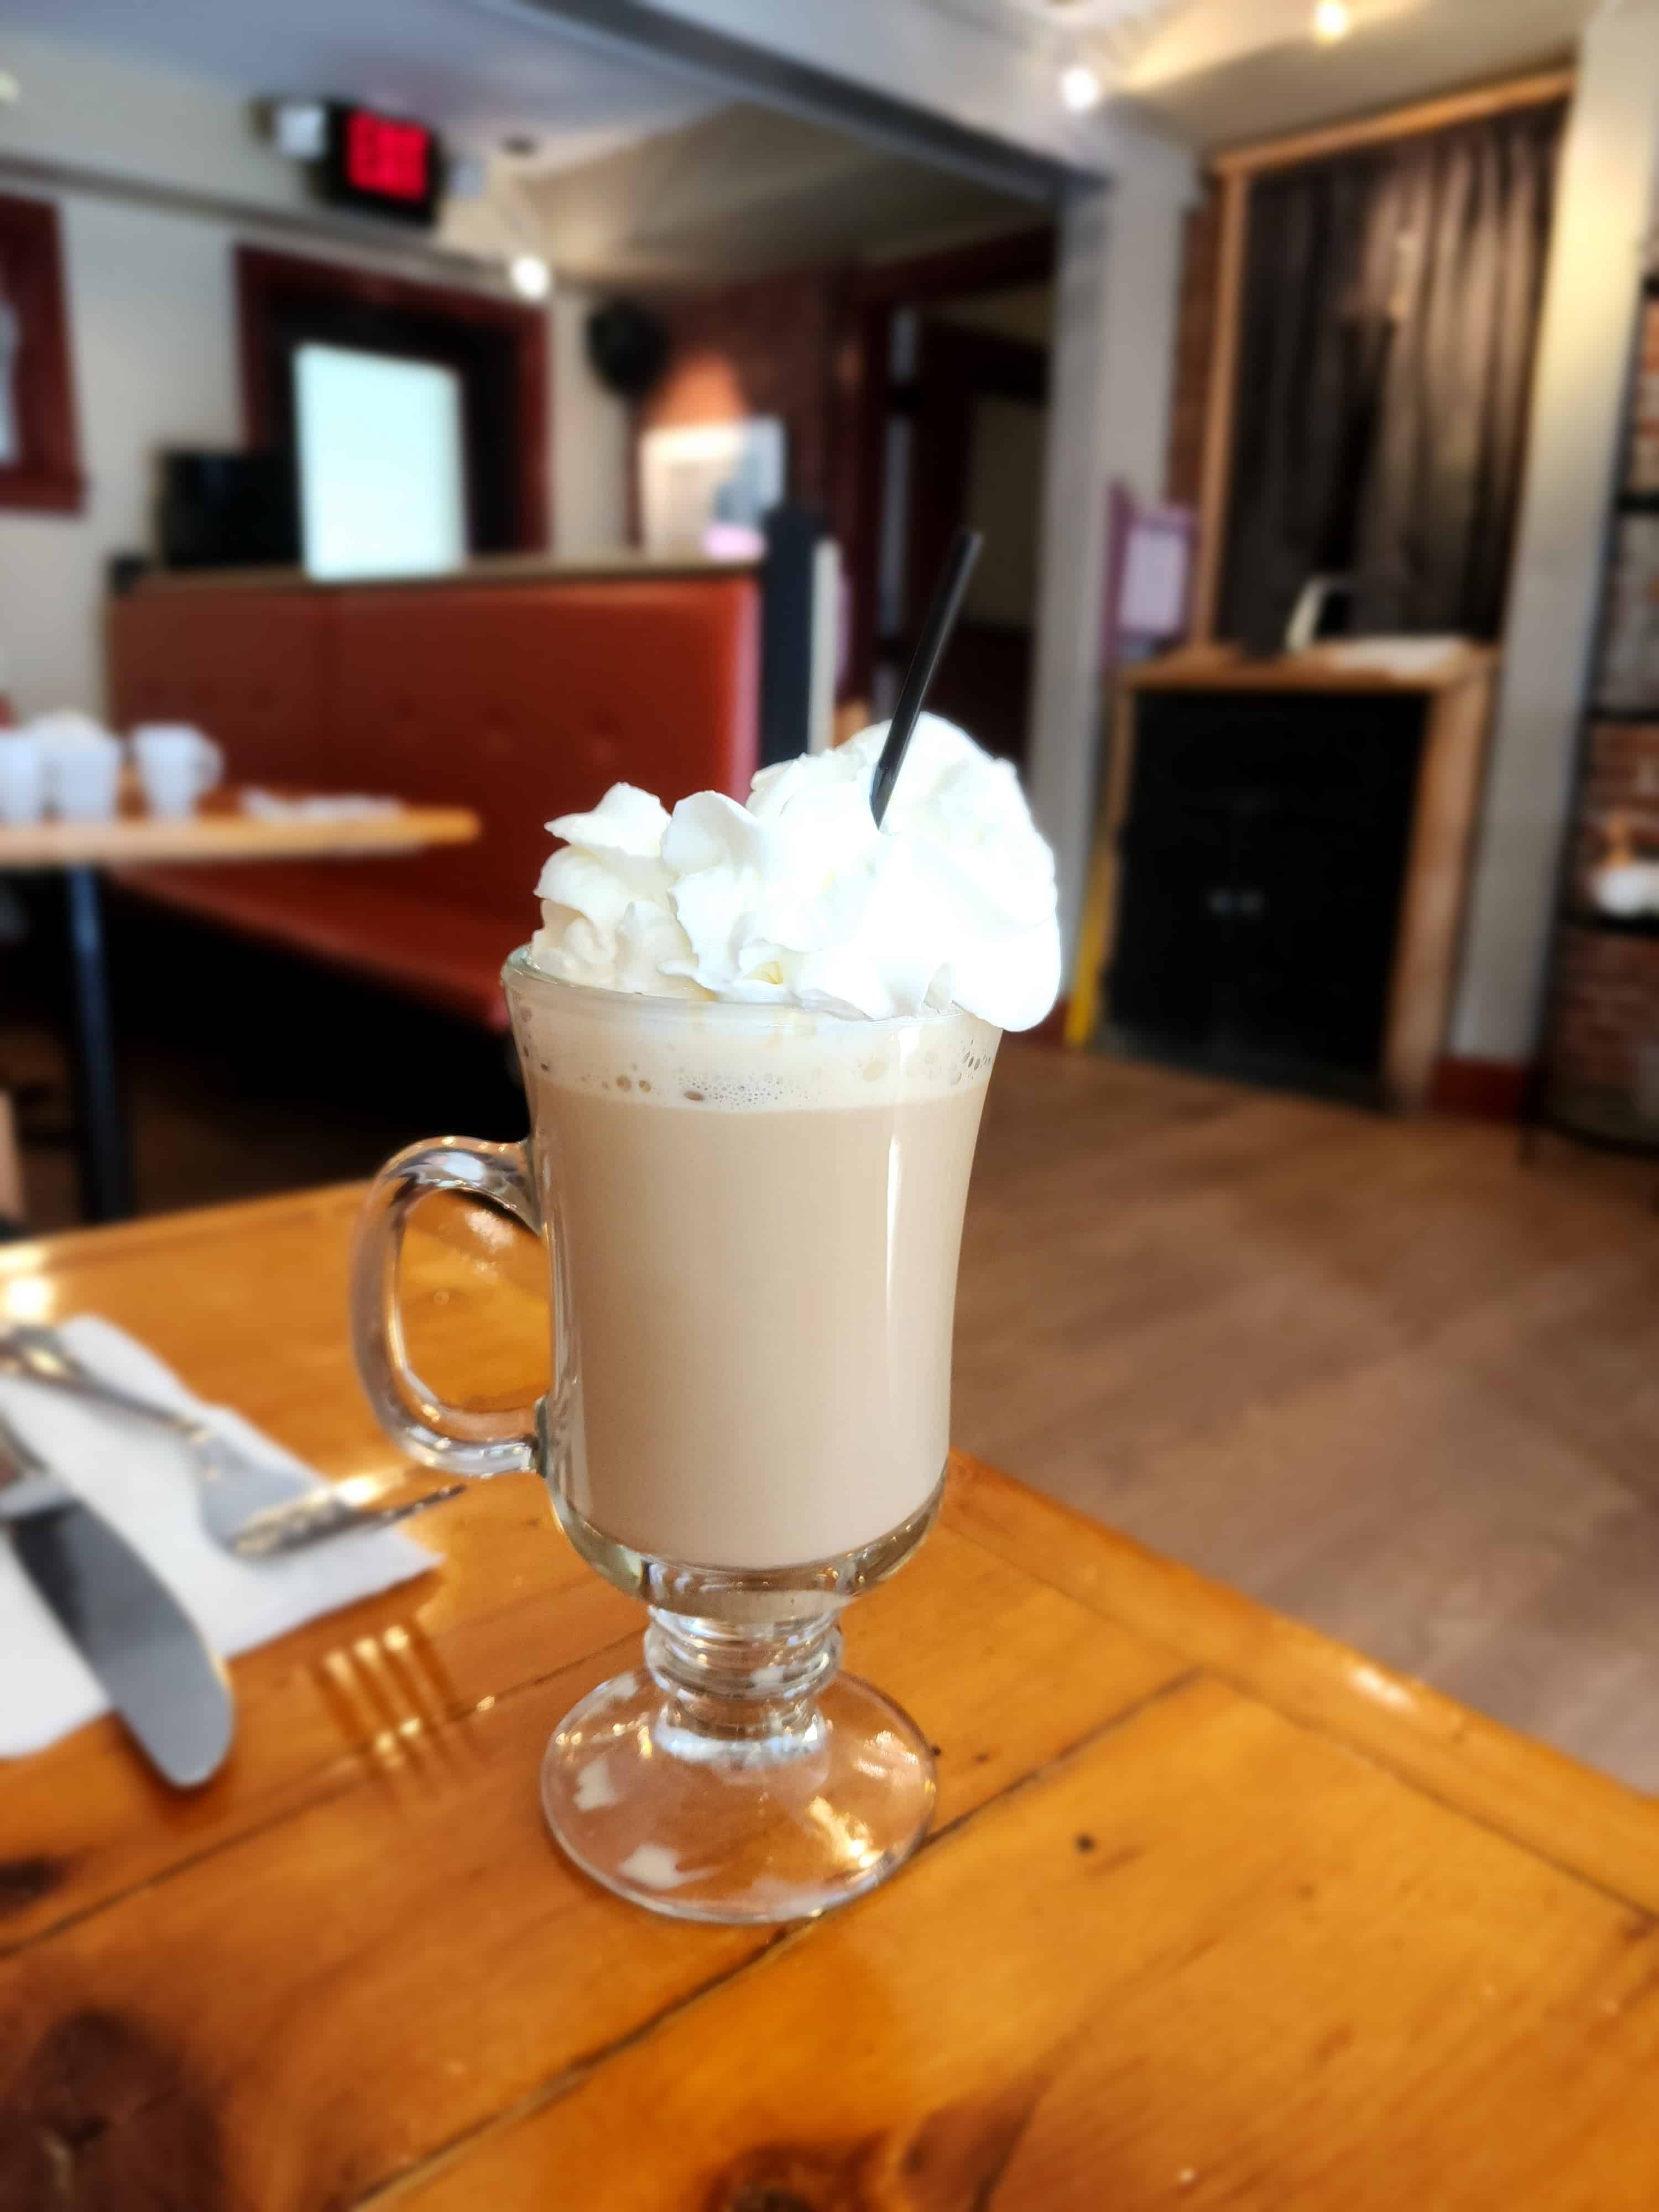 a hot Irish coffee topped with whipped cream sits in a glass mug on top of a restaurant table, background is blurred